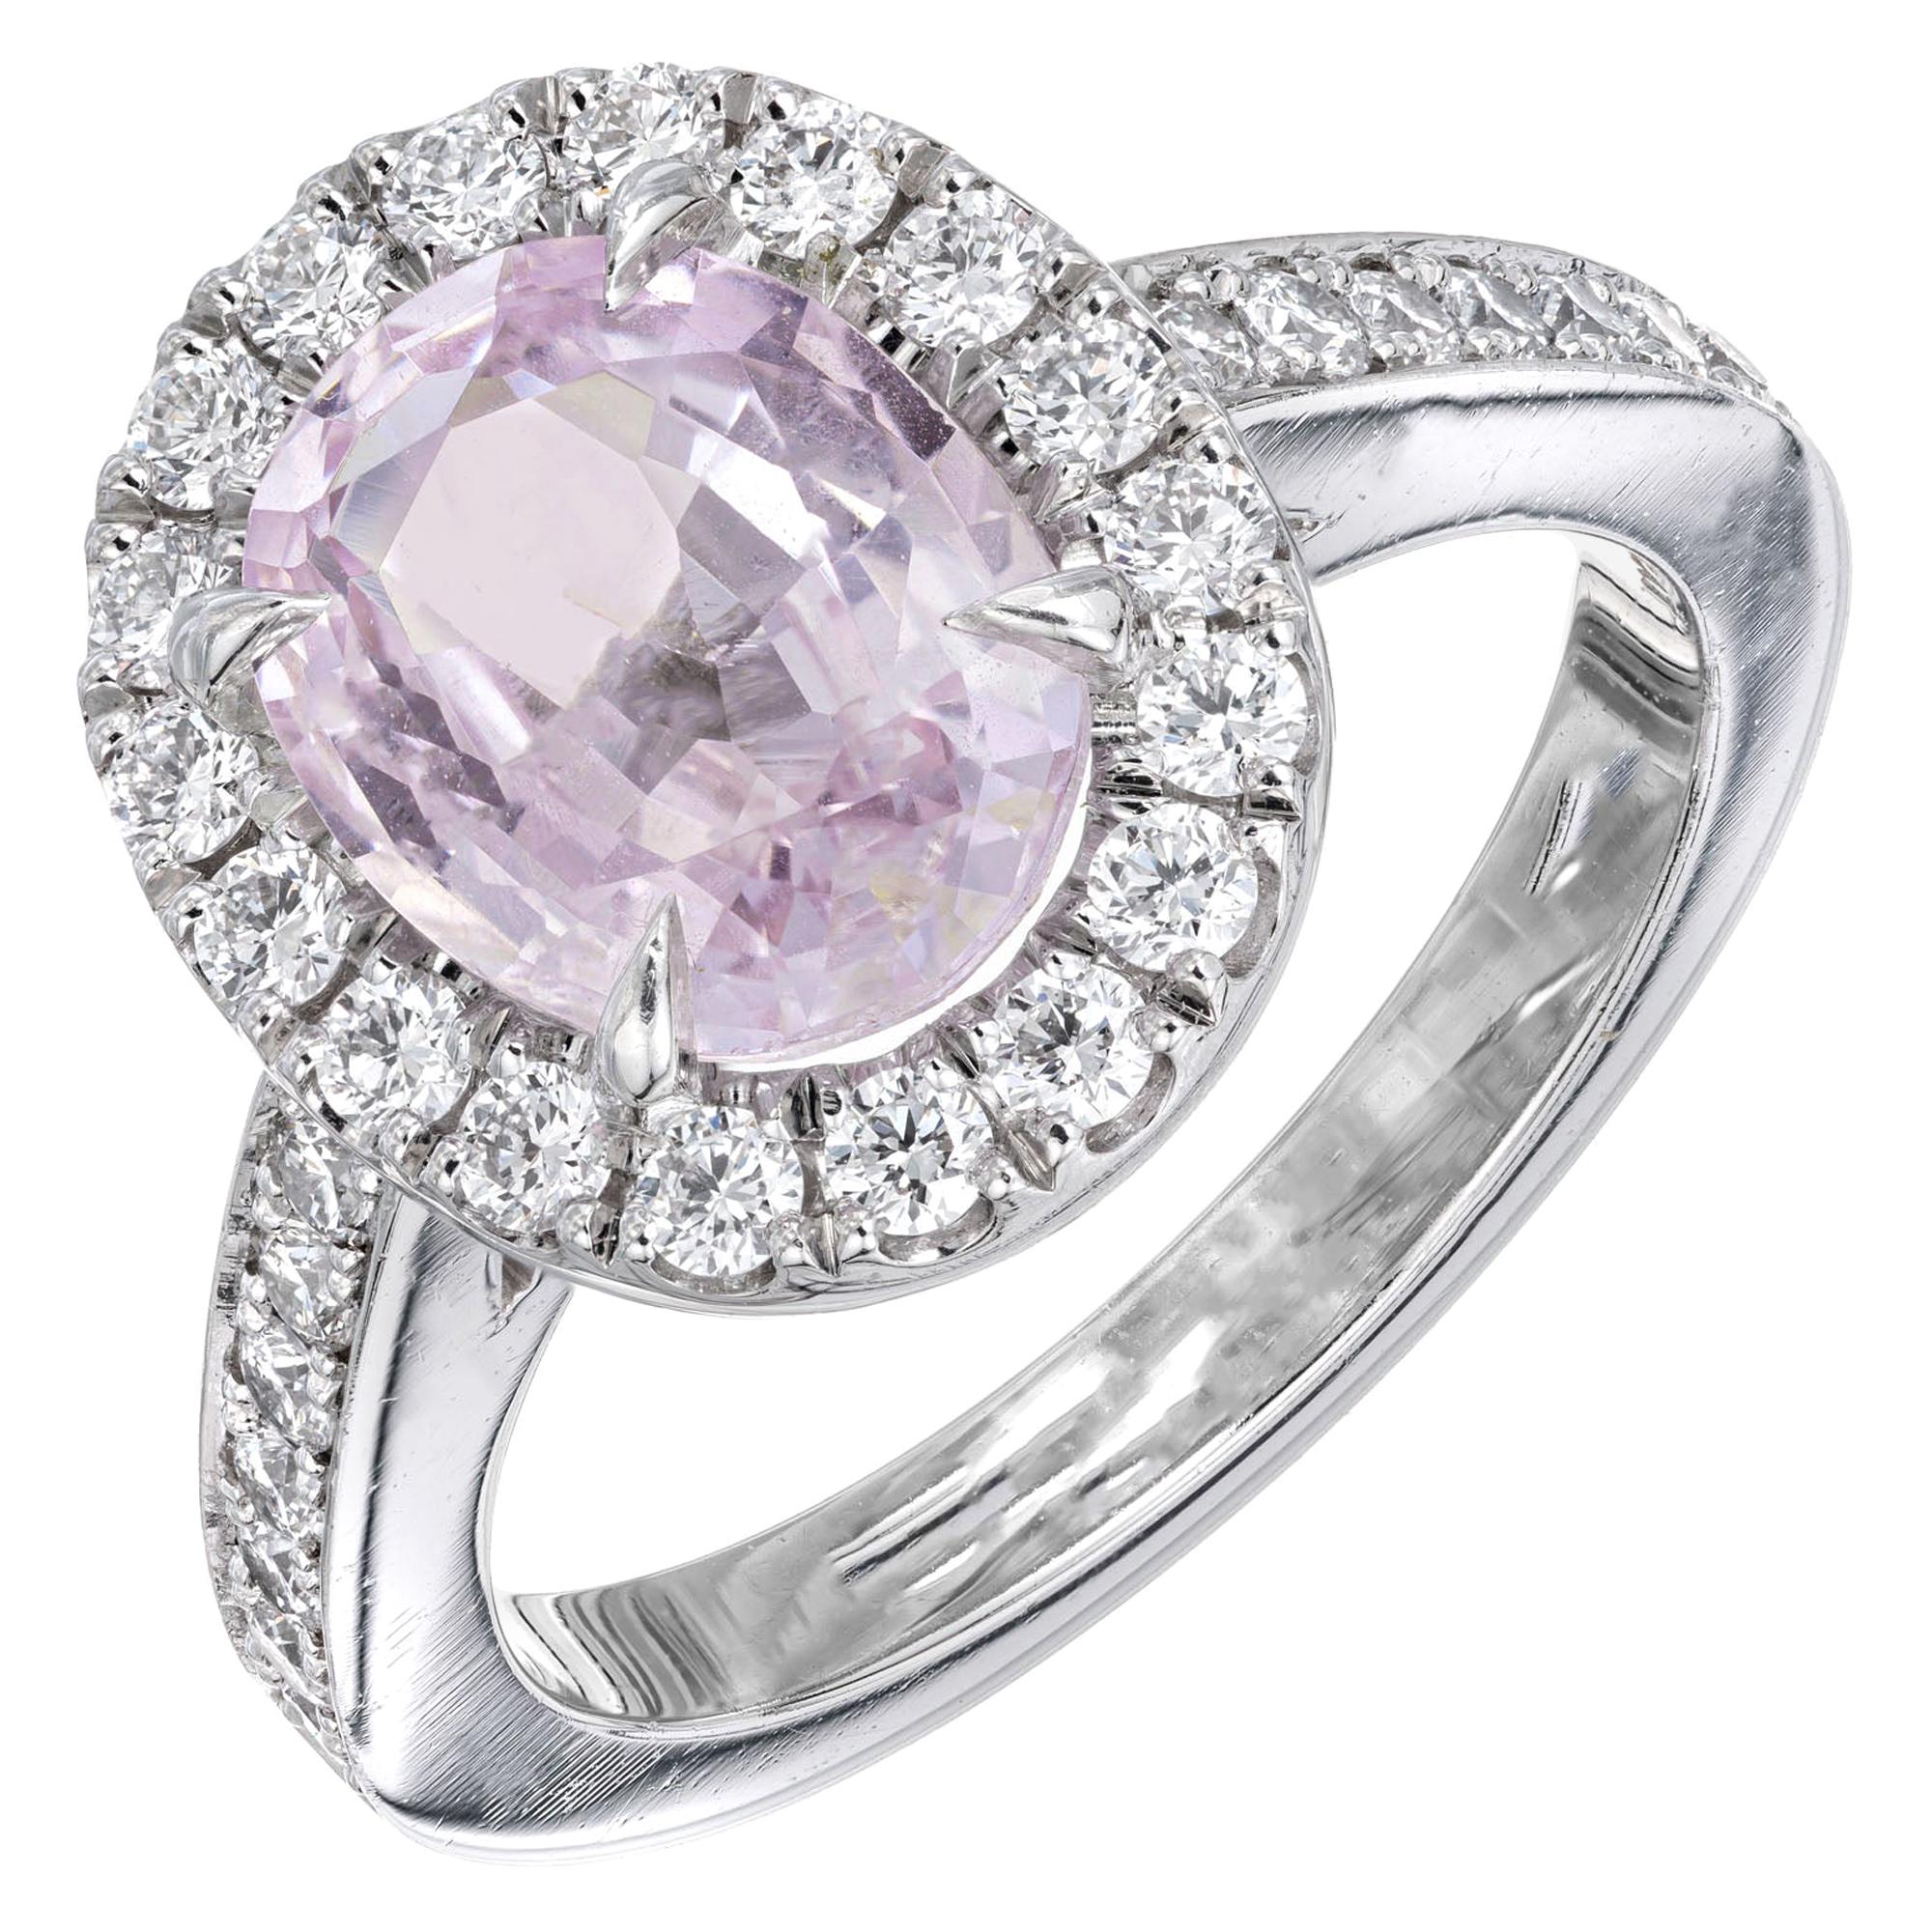 Peter Suchy GIA 2.74 Carat Oval Pink Sapphire Diamond Halo Platinum Ring For Sale